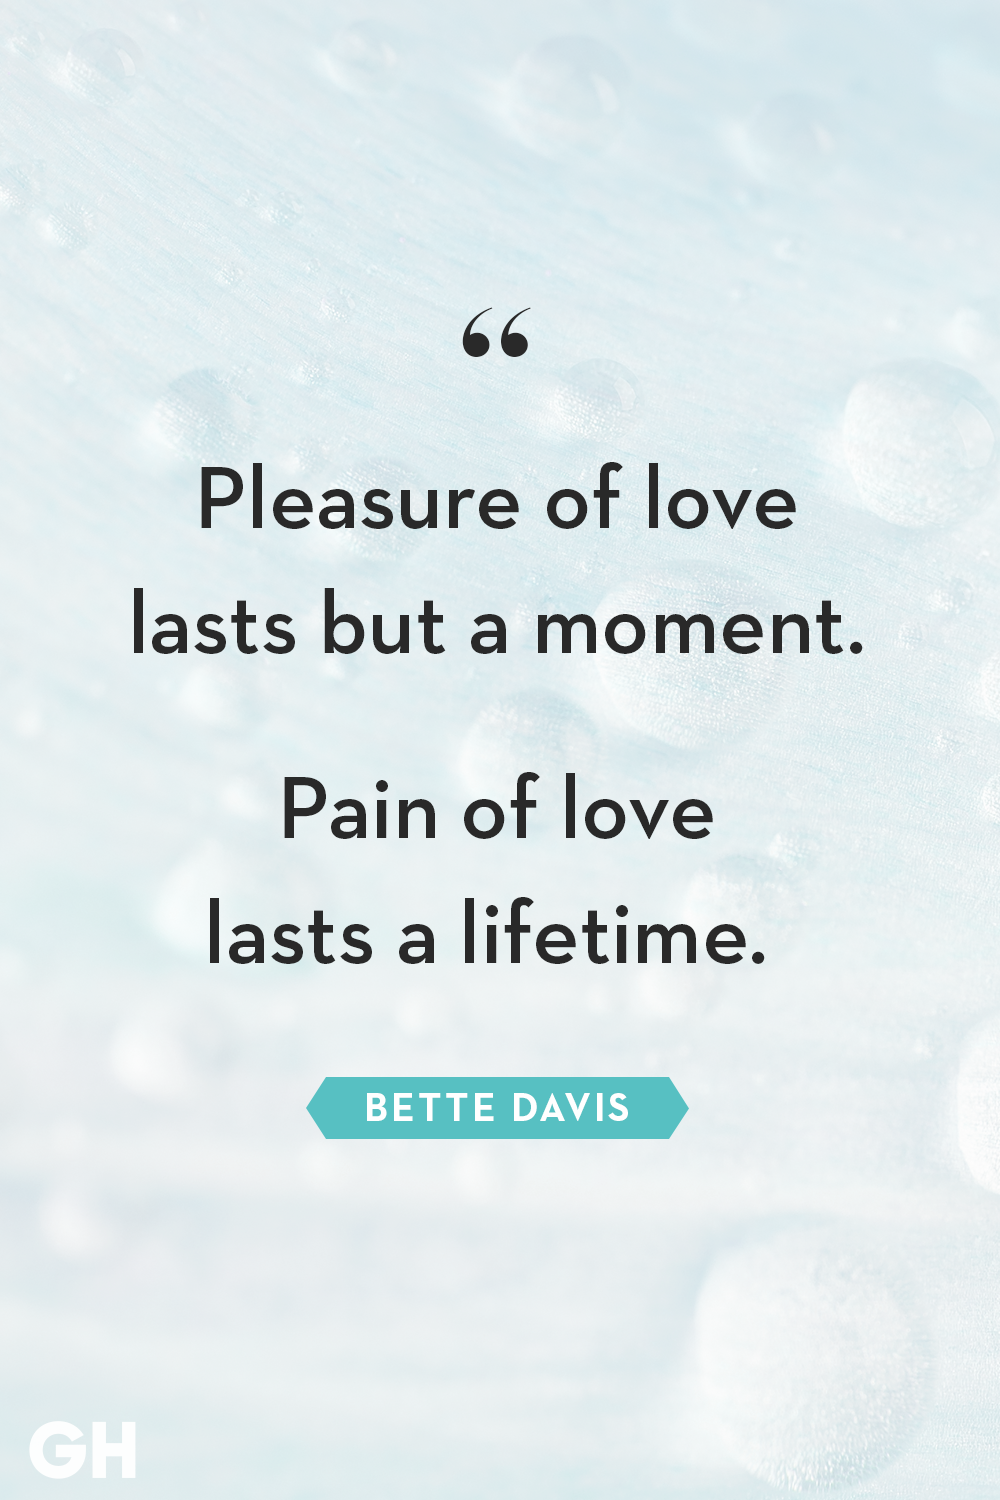 heartbreaking quotes about love